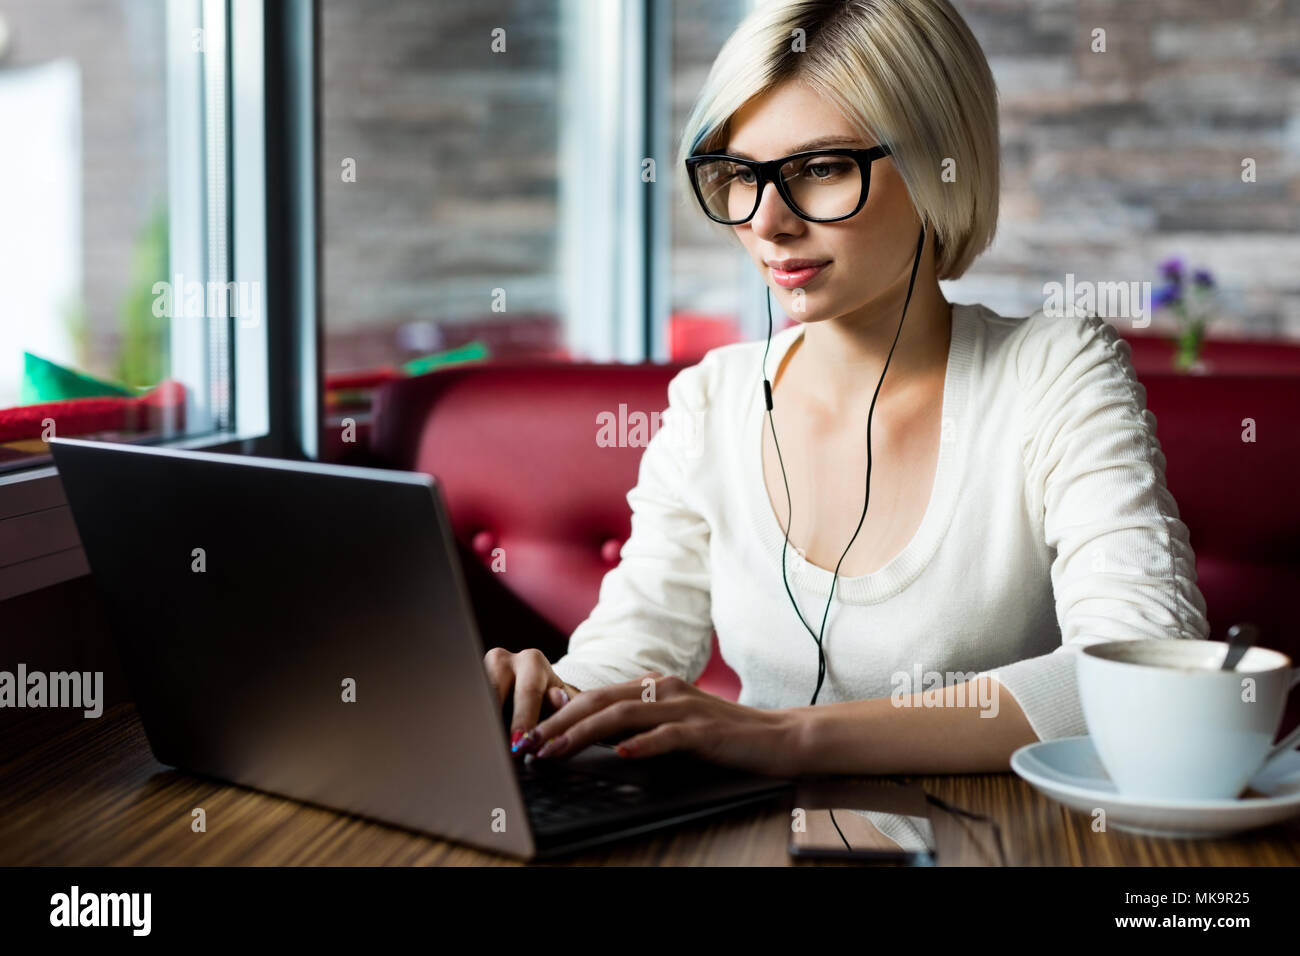 Female Blogger Wearing Glasses While Using Laptop In Cafe Stock Photo